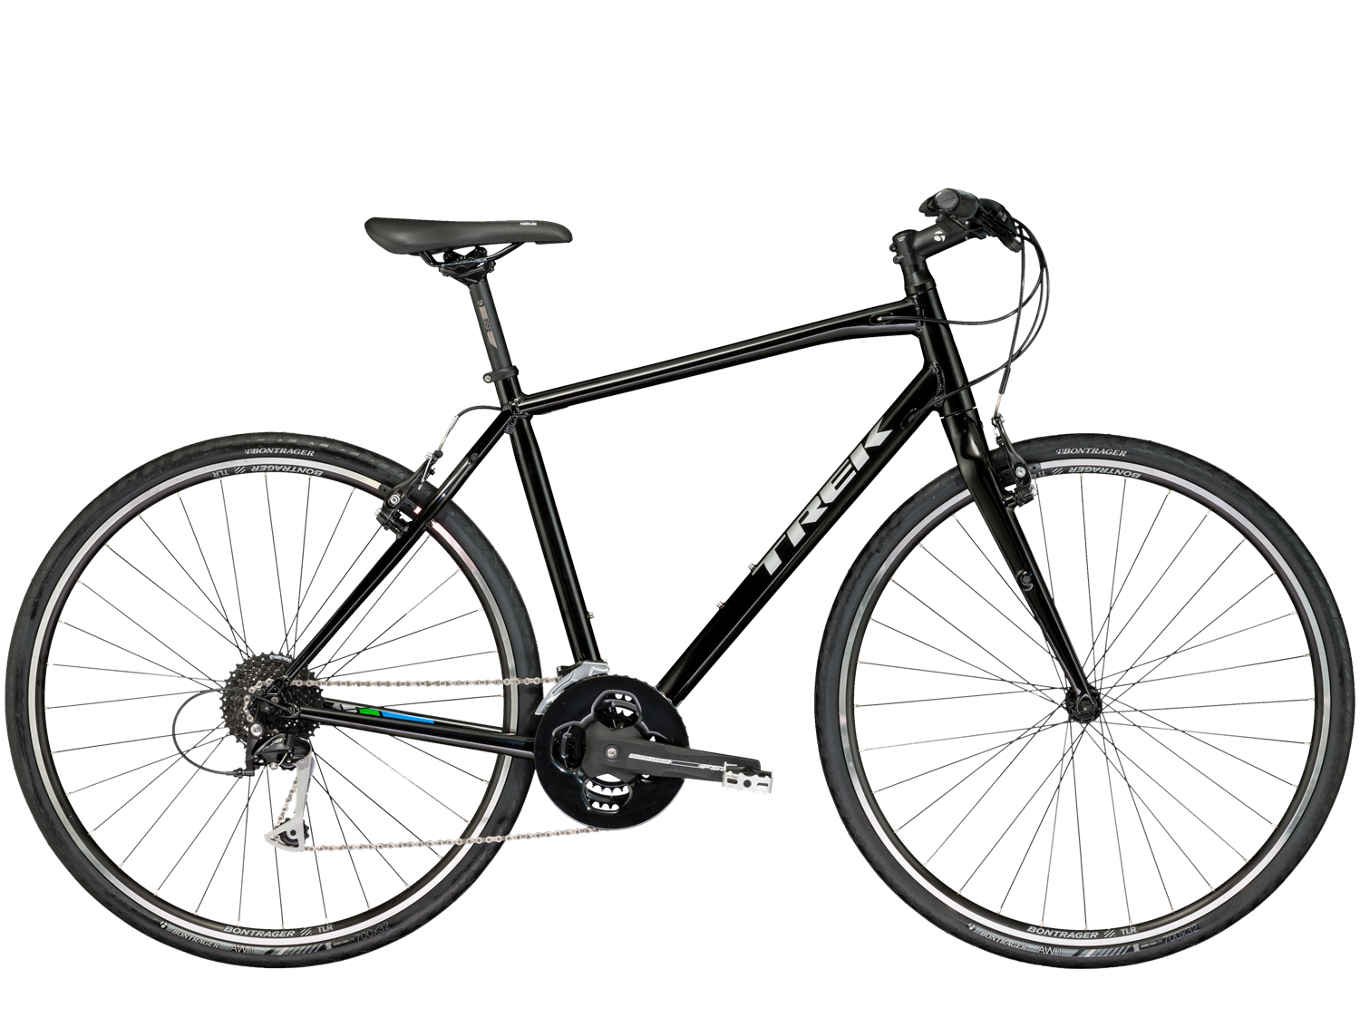 Stock photo of this bike  from https://trek.scene7.com/is/image/TrekBicycleProducts/1327010_2017_A_1_FX_3?wid=1360&hei=1020&fmt=jpg,rgb&qlt=40,1&iccEmbed=0&cache=on,on